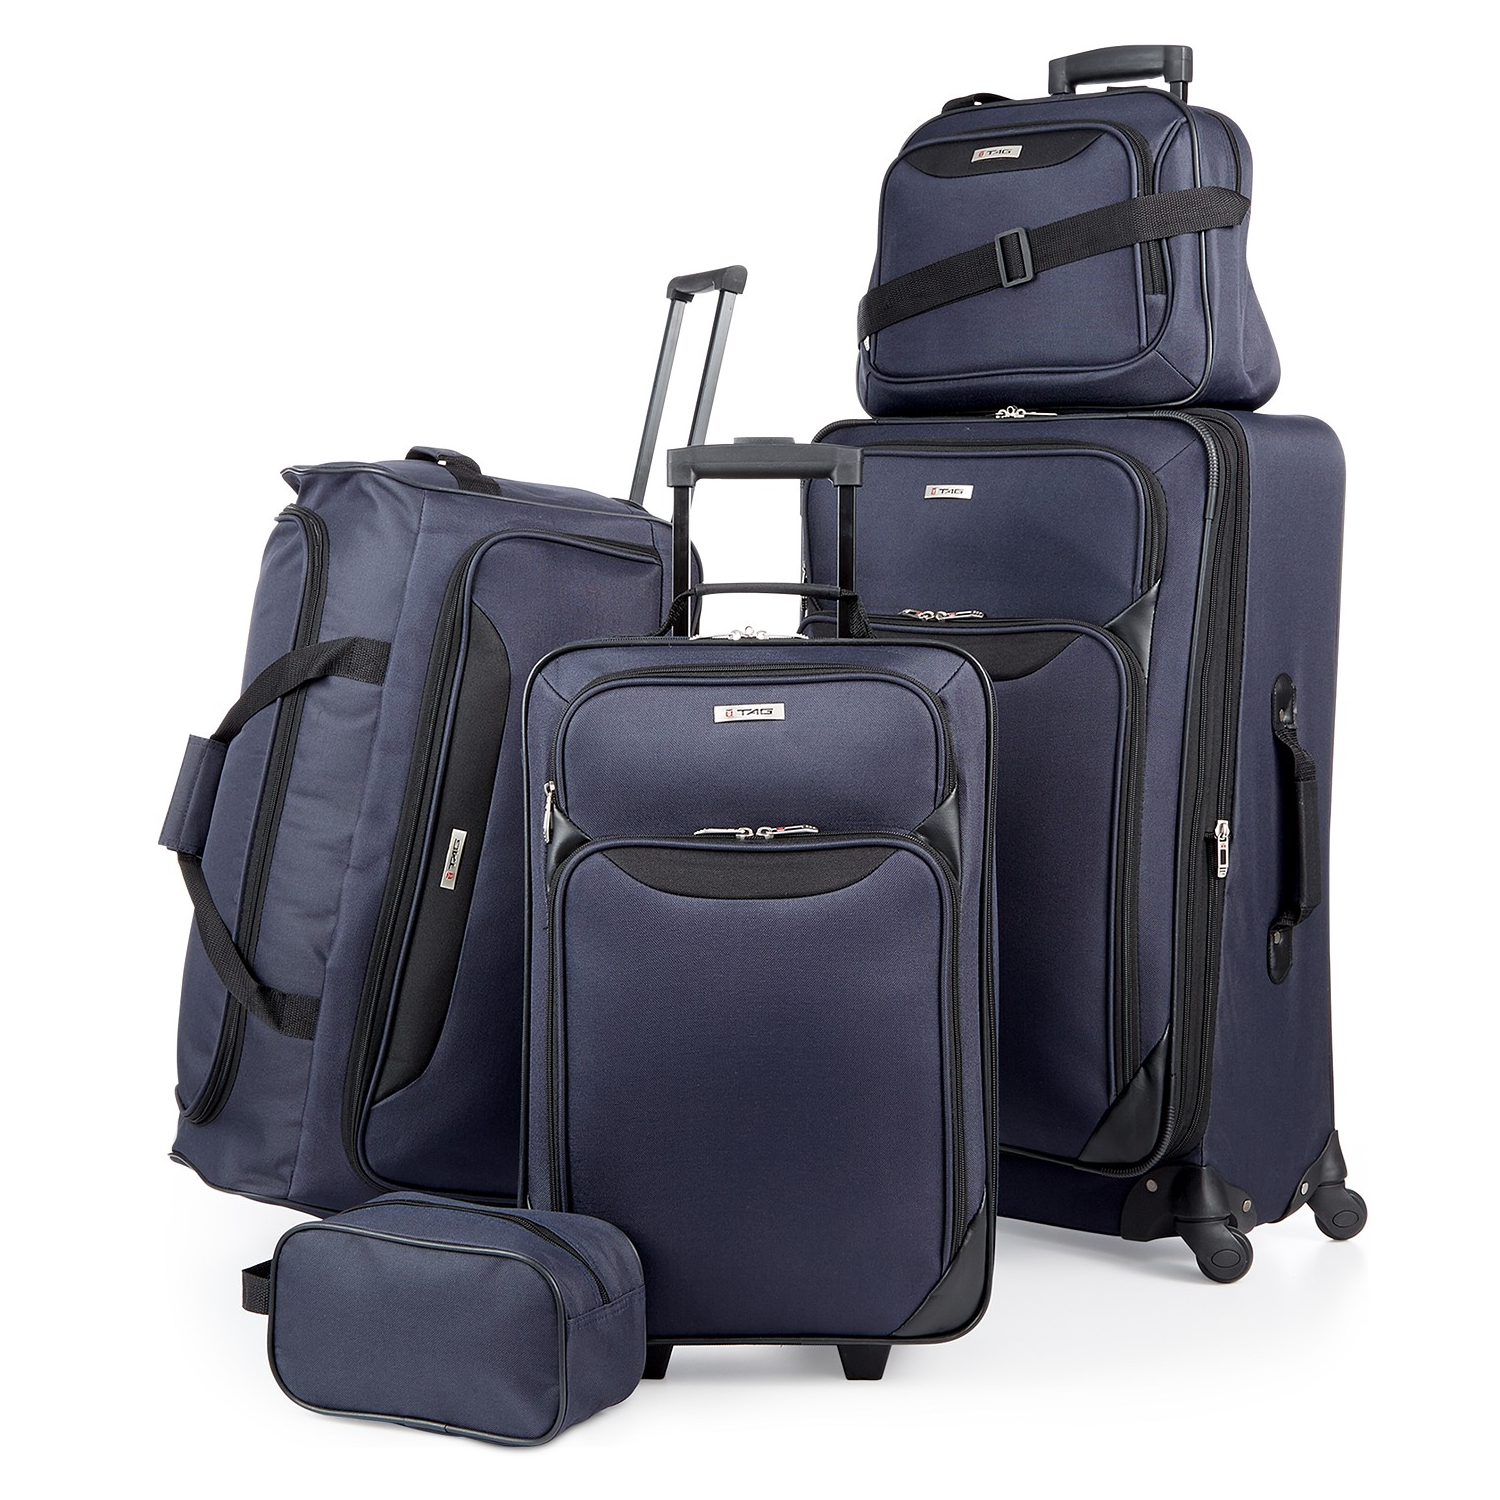 Tag Springfield III 5 Piece Luggage Set Only $79.99 Shipped! (Reg $200)